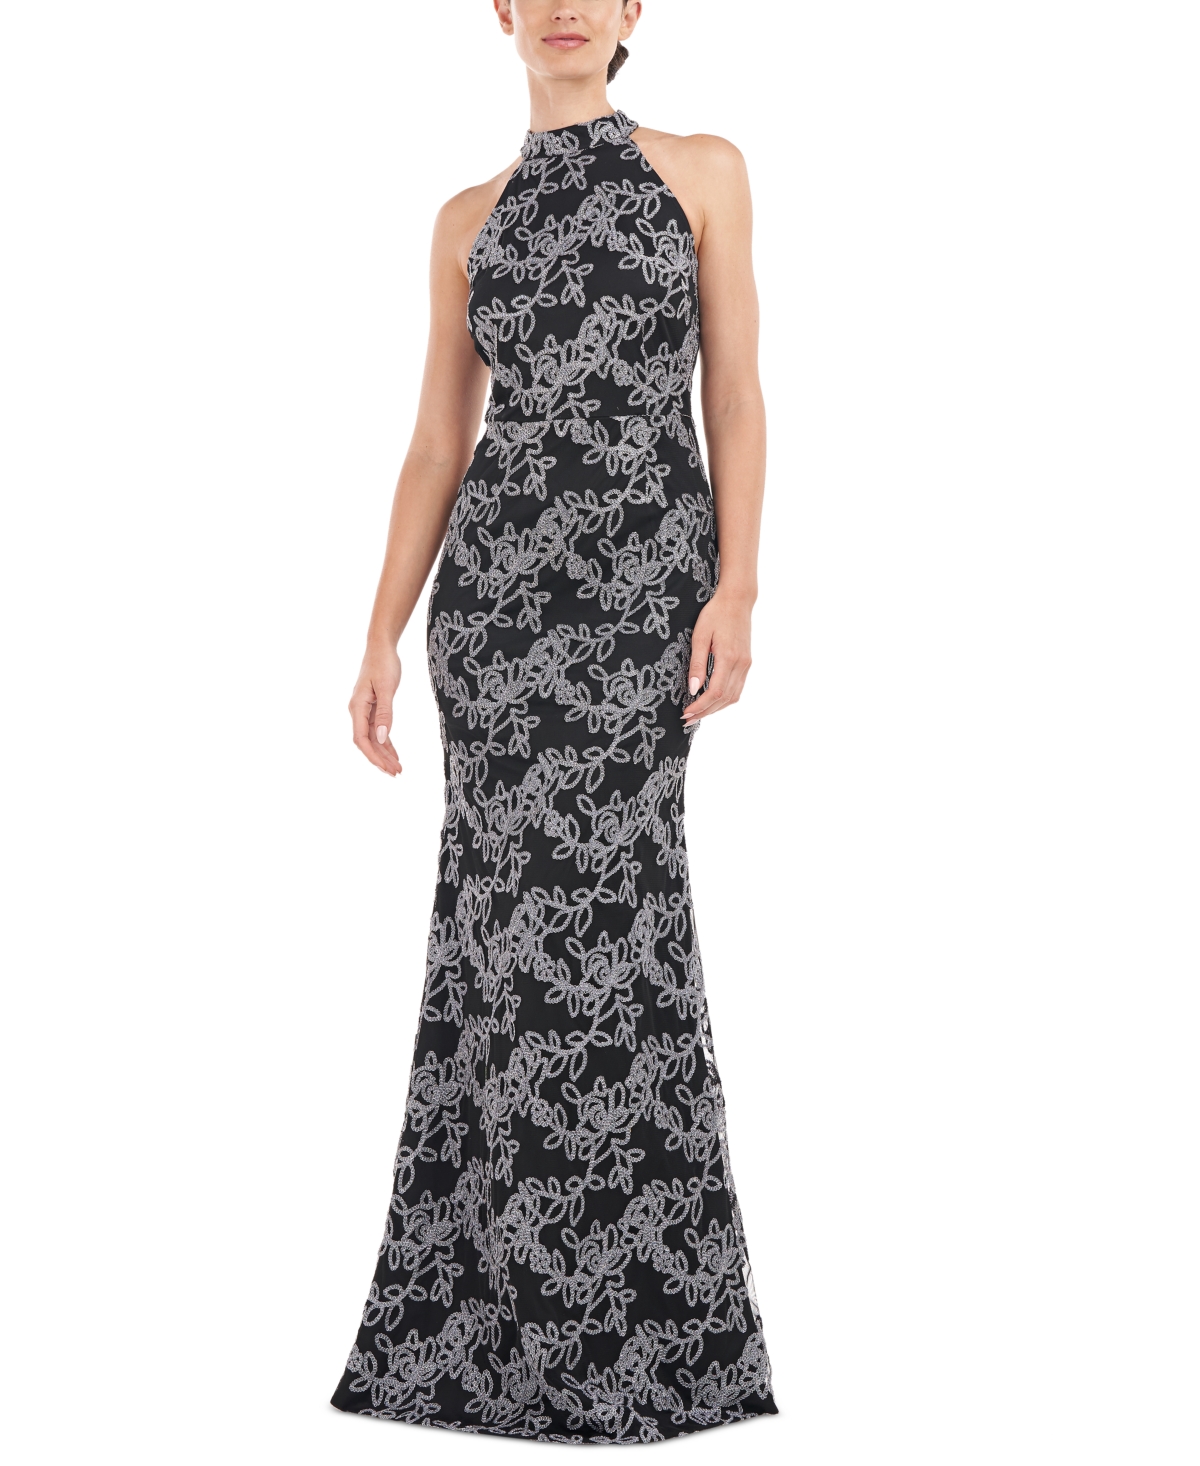 Js Collections Women's Halter-Neck Embellished Gown